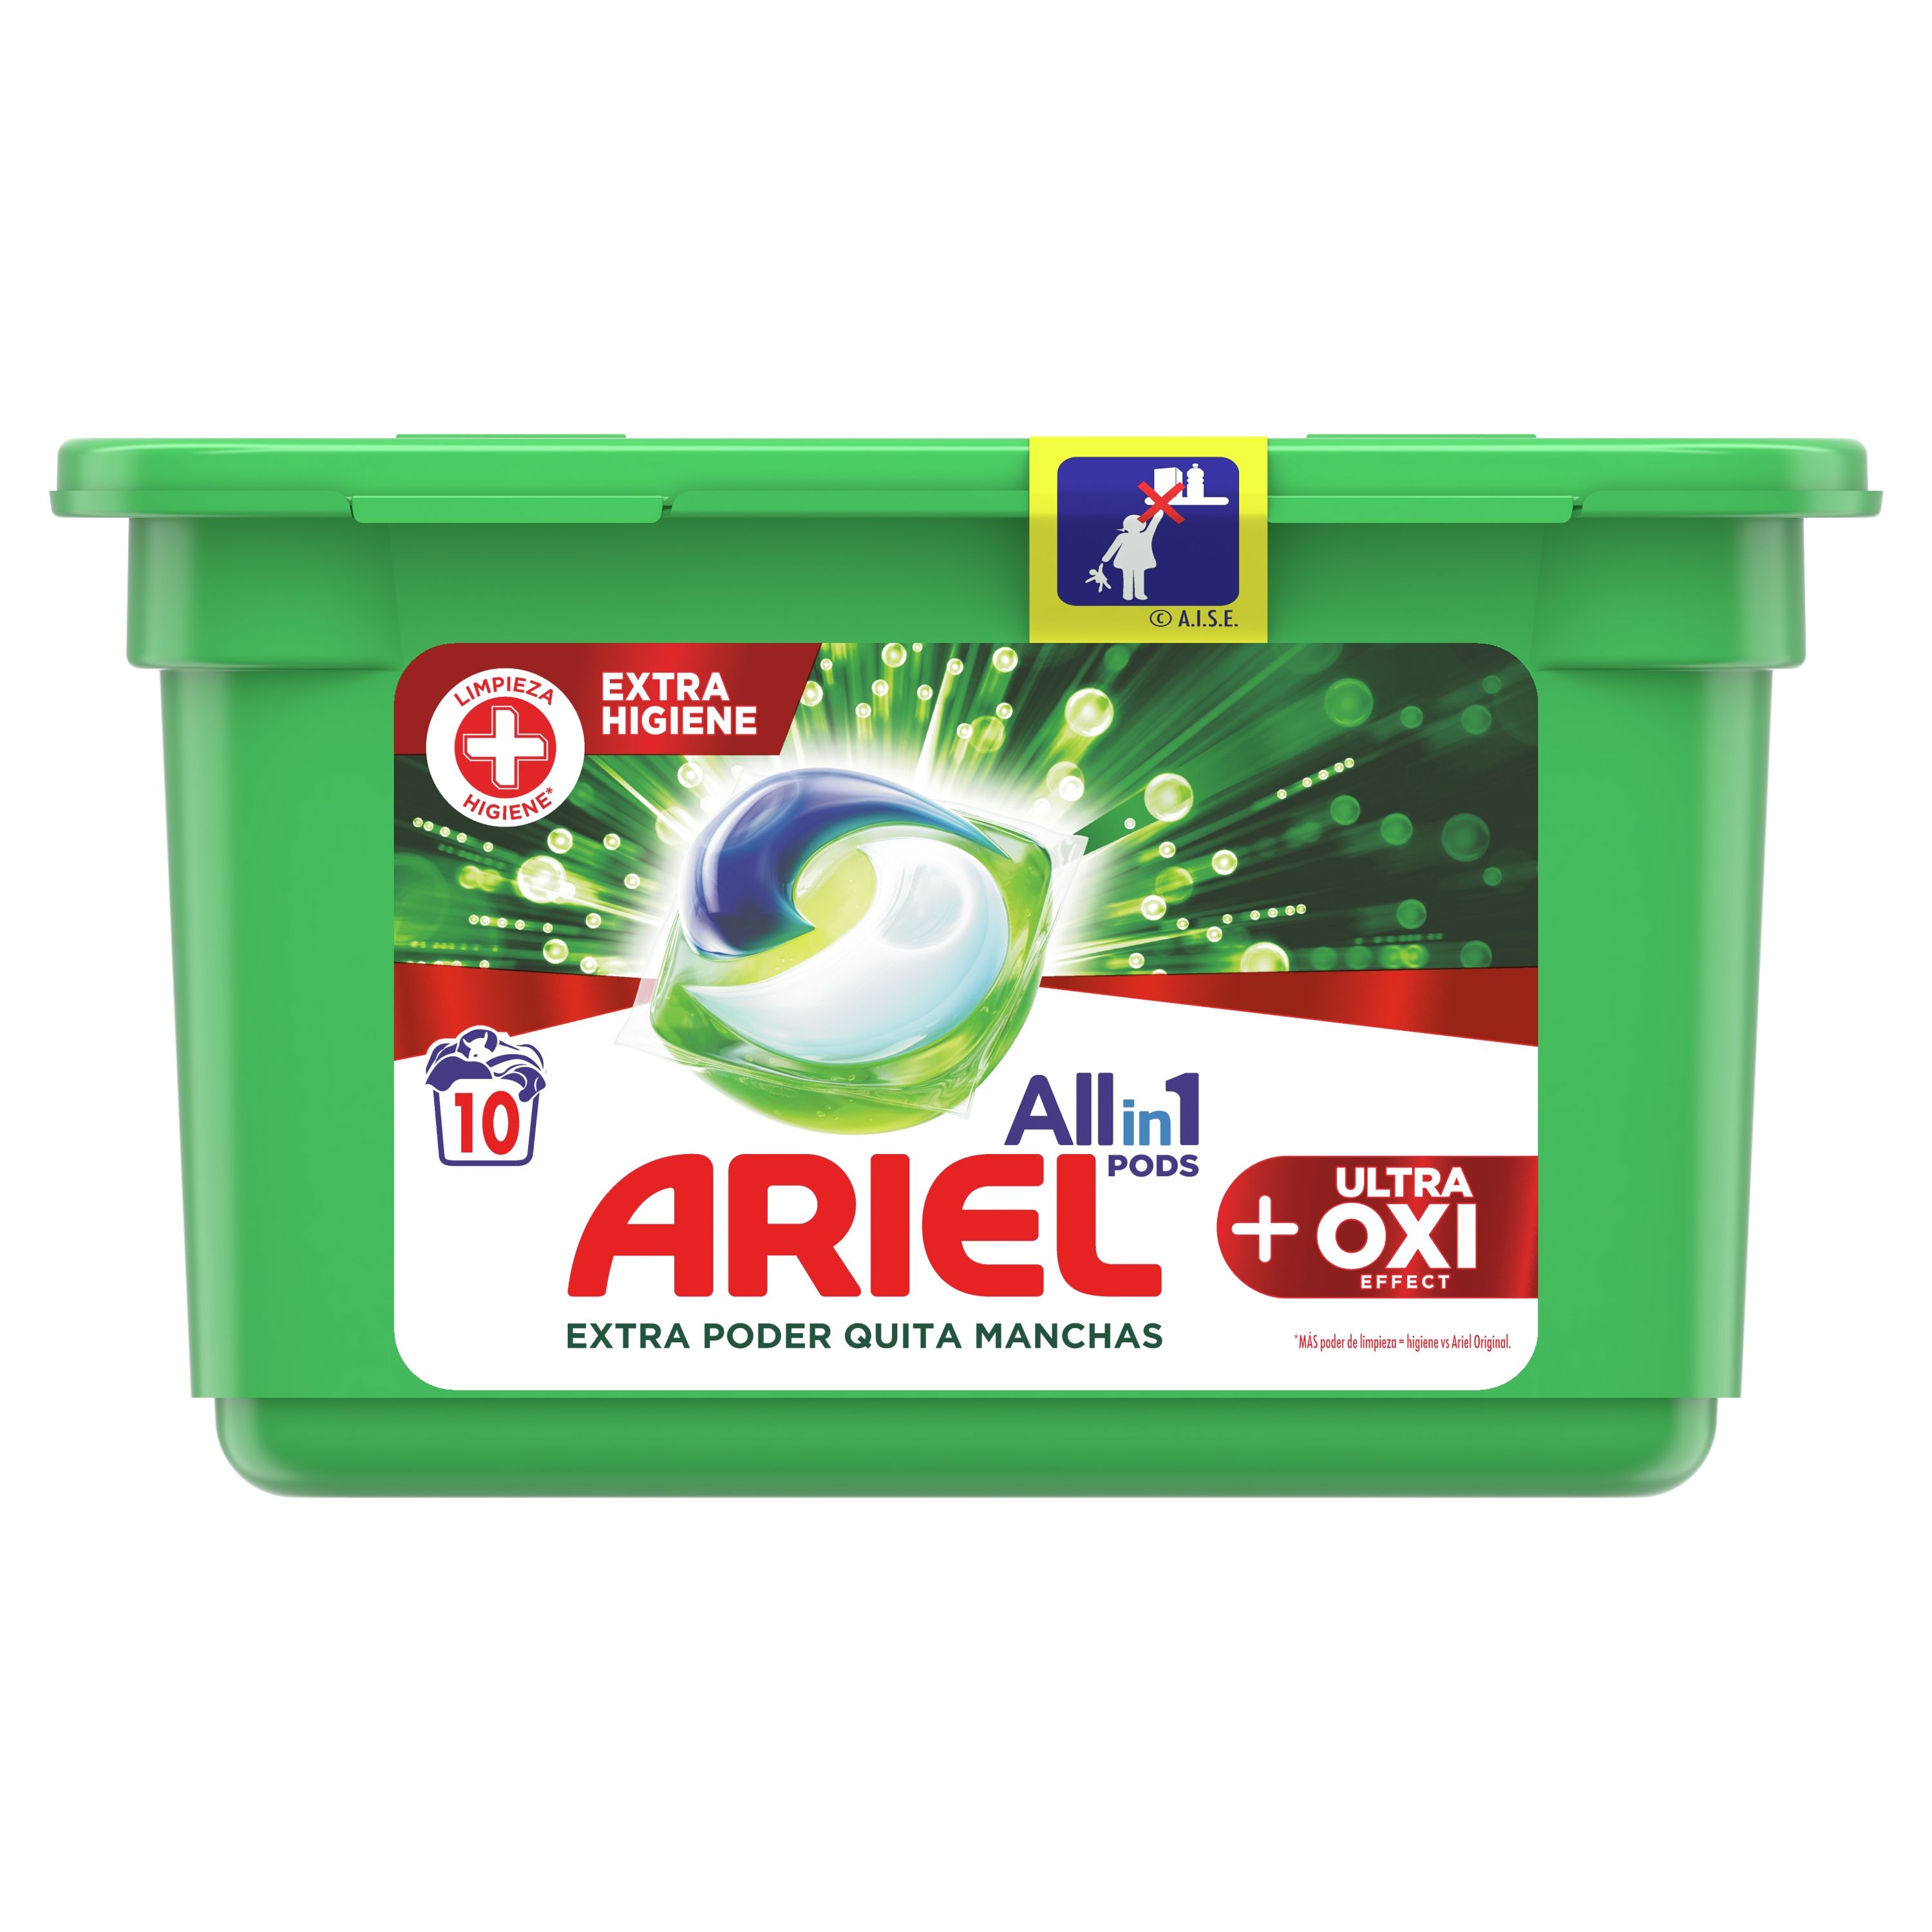 ariel-detergente-capsulas-all-in-one-ultra-oxy-effect-10-unidades-130138-0_1